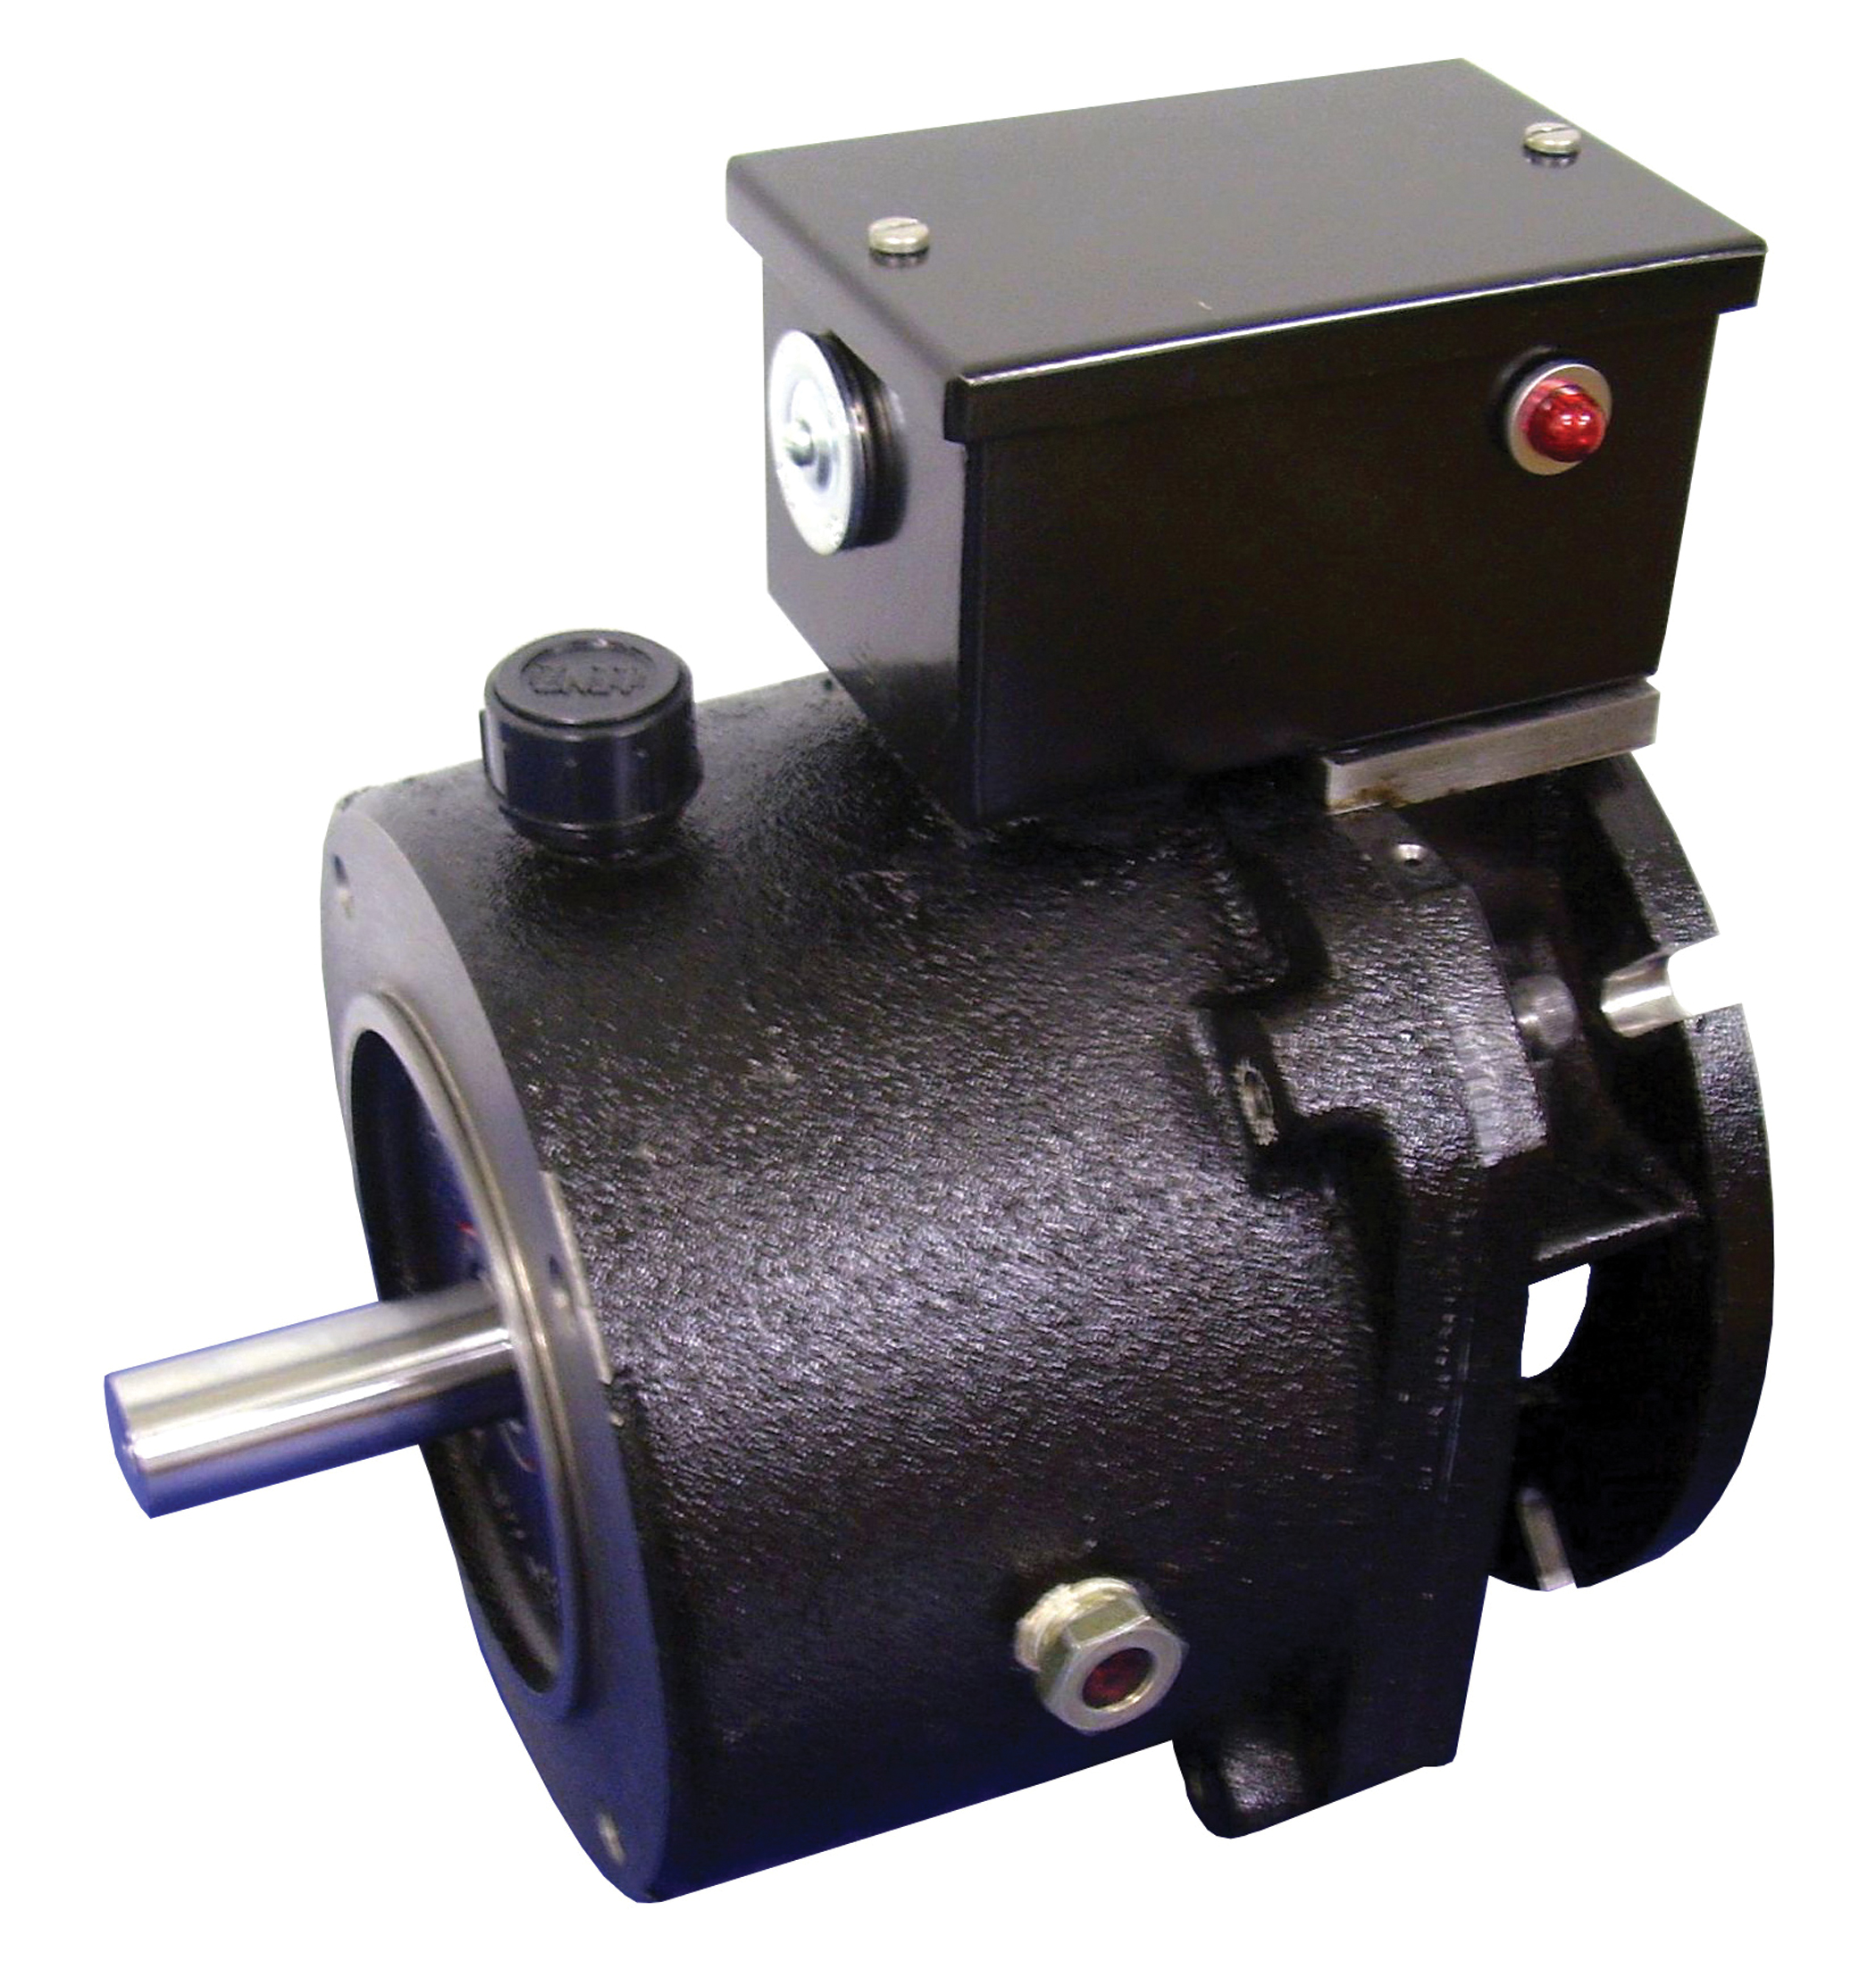 This is a Force Control Industries coupler brake. In fact, the company’s Posistop and MagnaShear coupler brakes mount between motors and reducers, so engineers can eliminate separate brake motors.